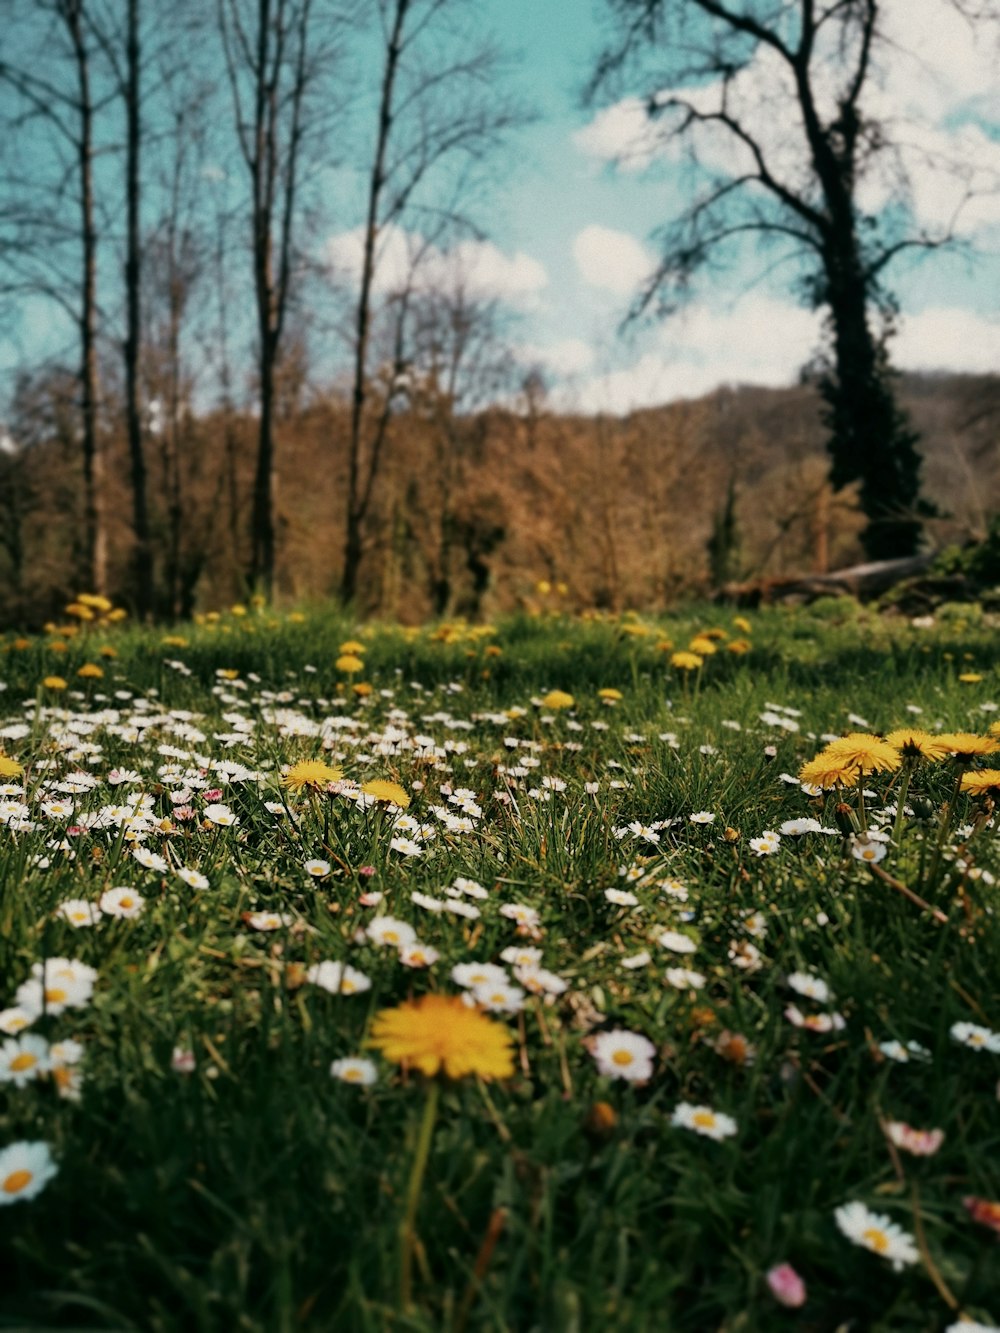 a field full of daisies and other flowers